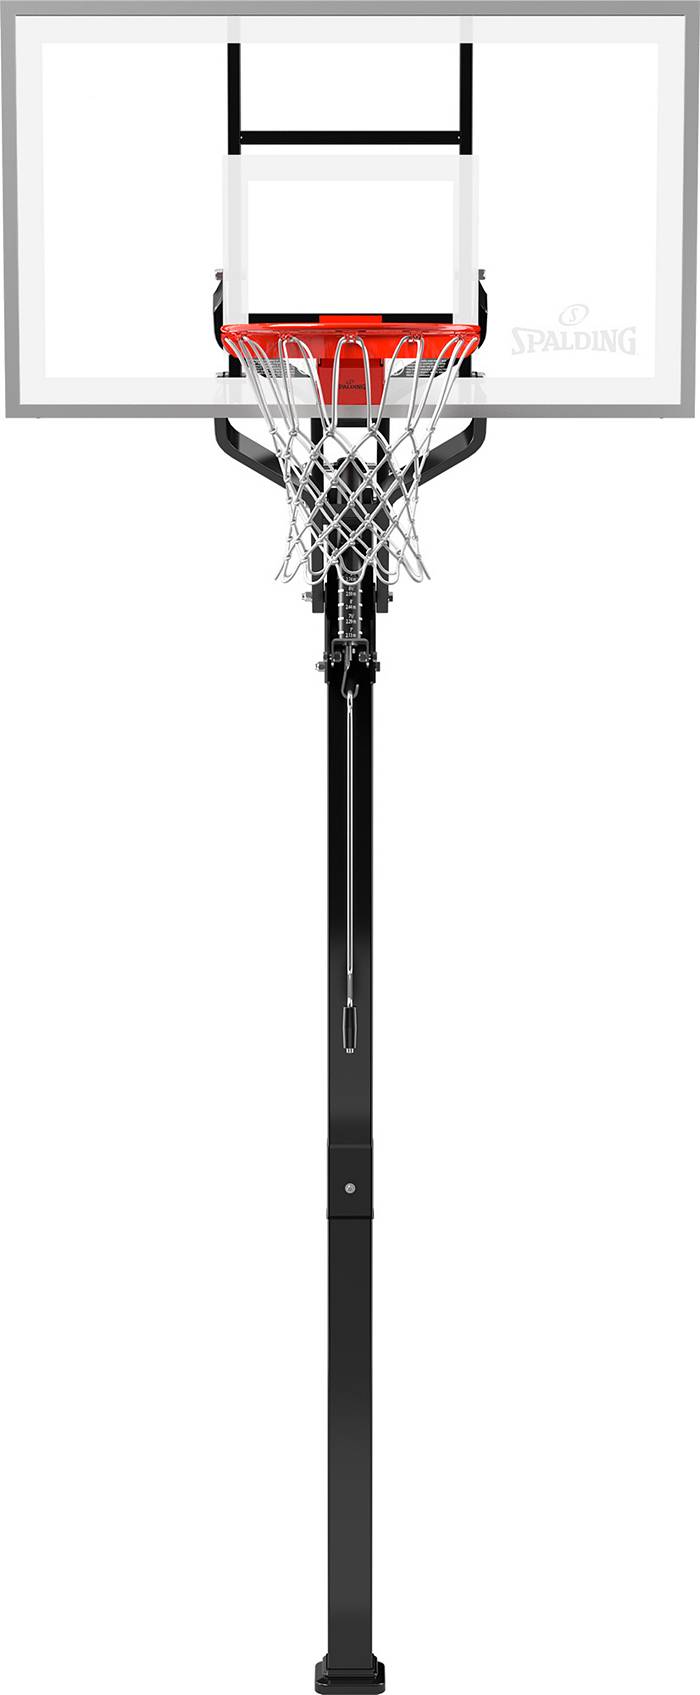 Lifetime Adjustable In-Ground Basketball Hoop (54-Inch Tempered Glass)